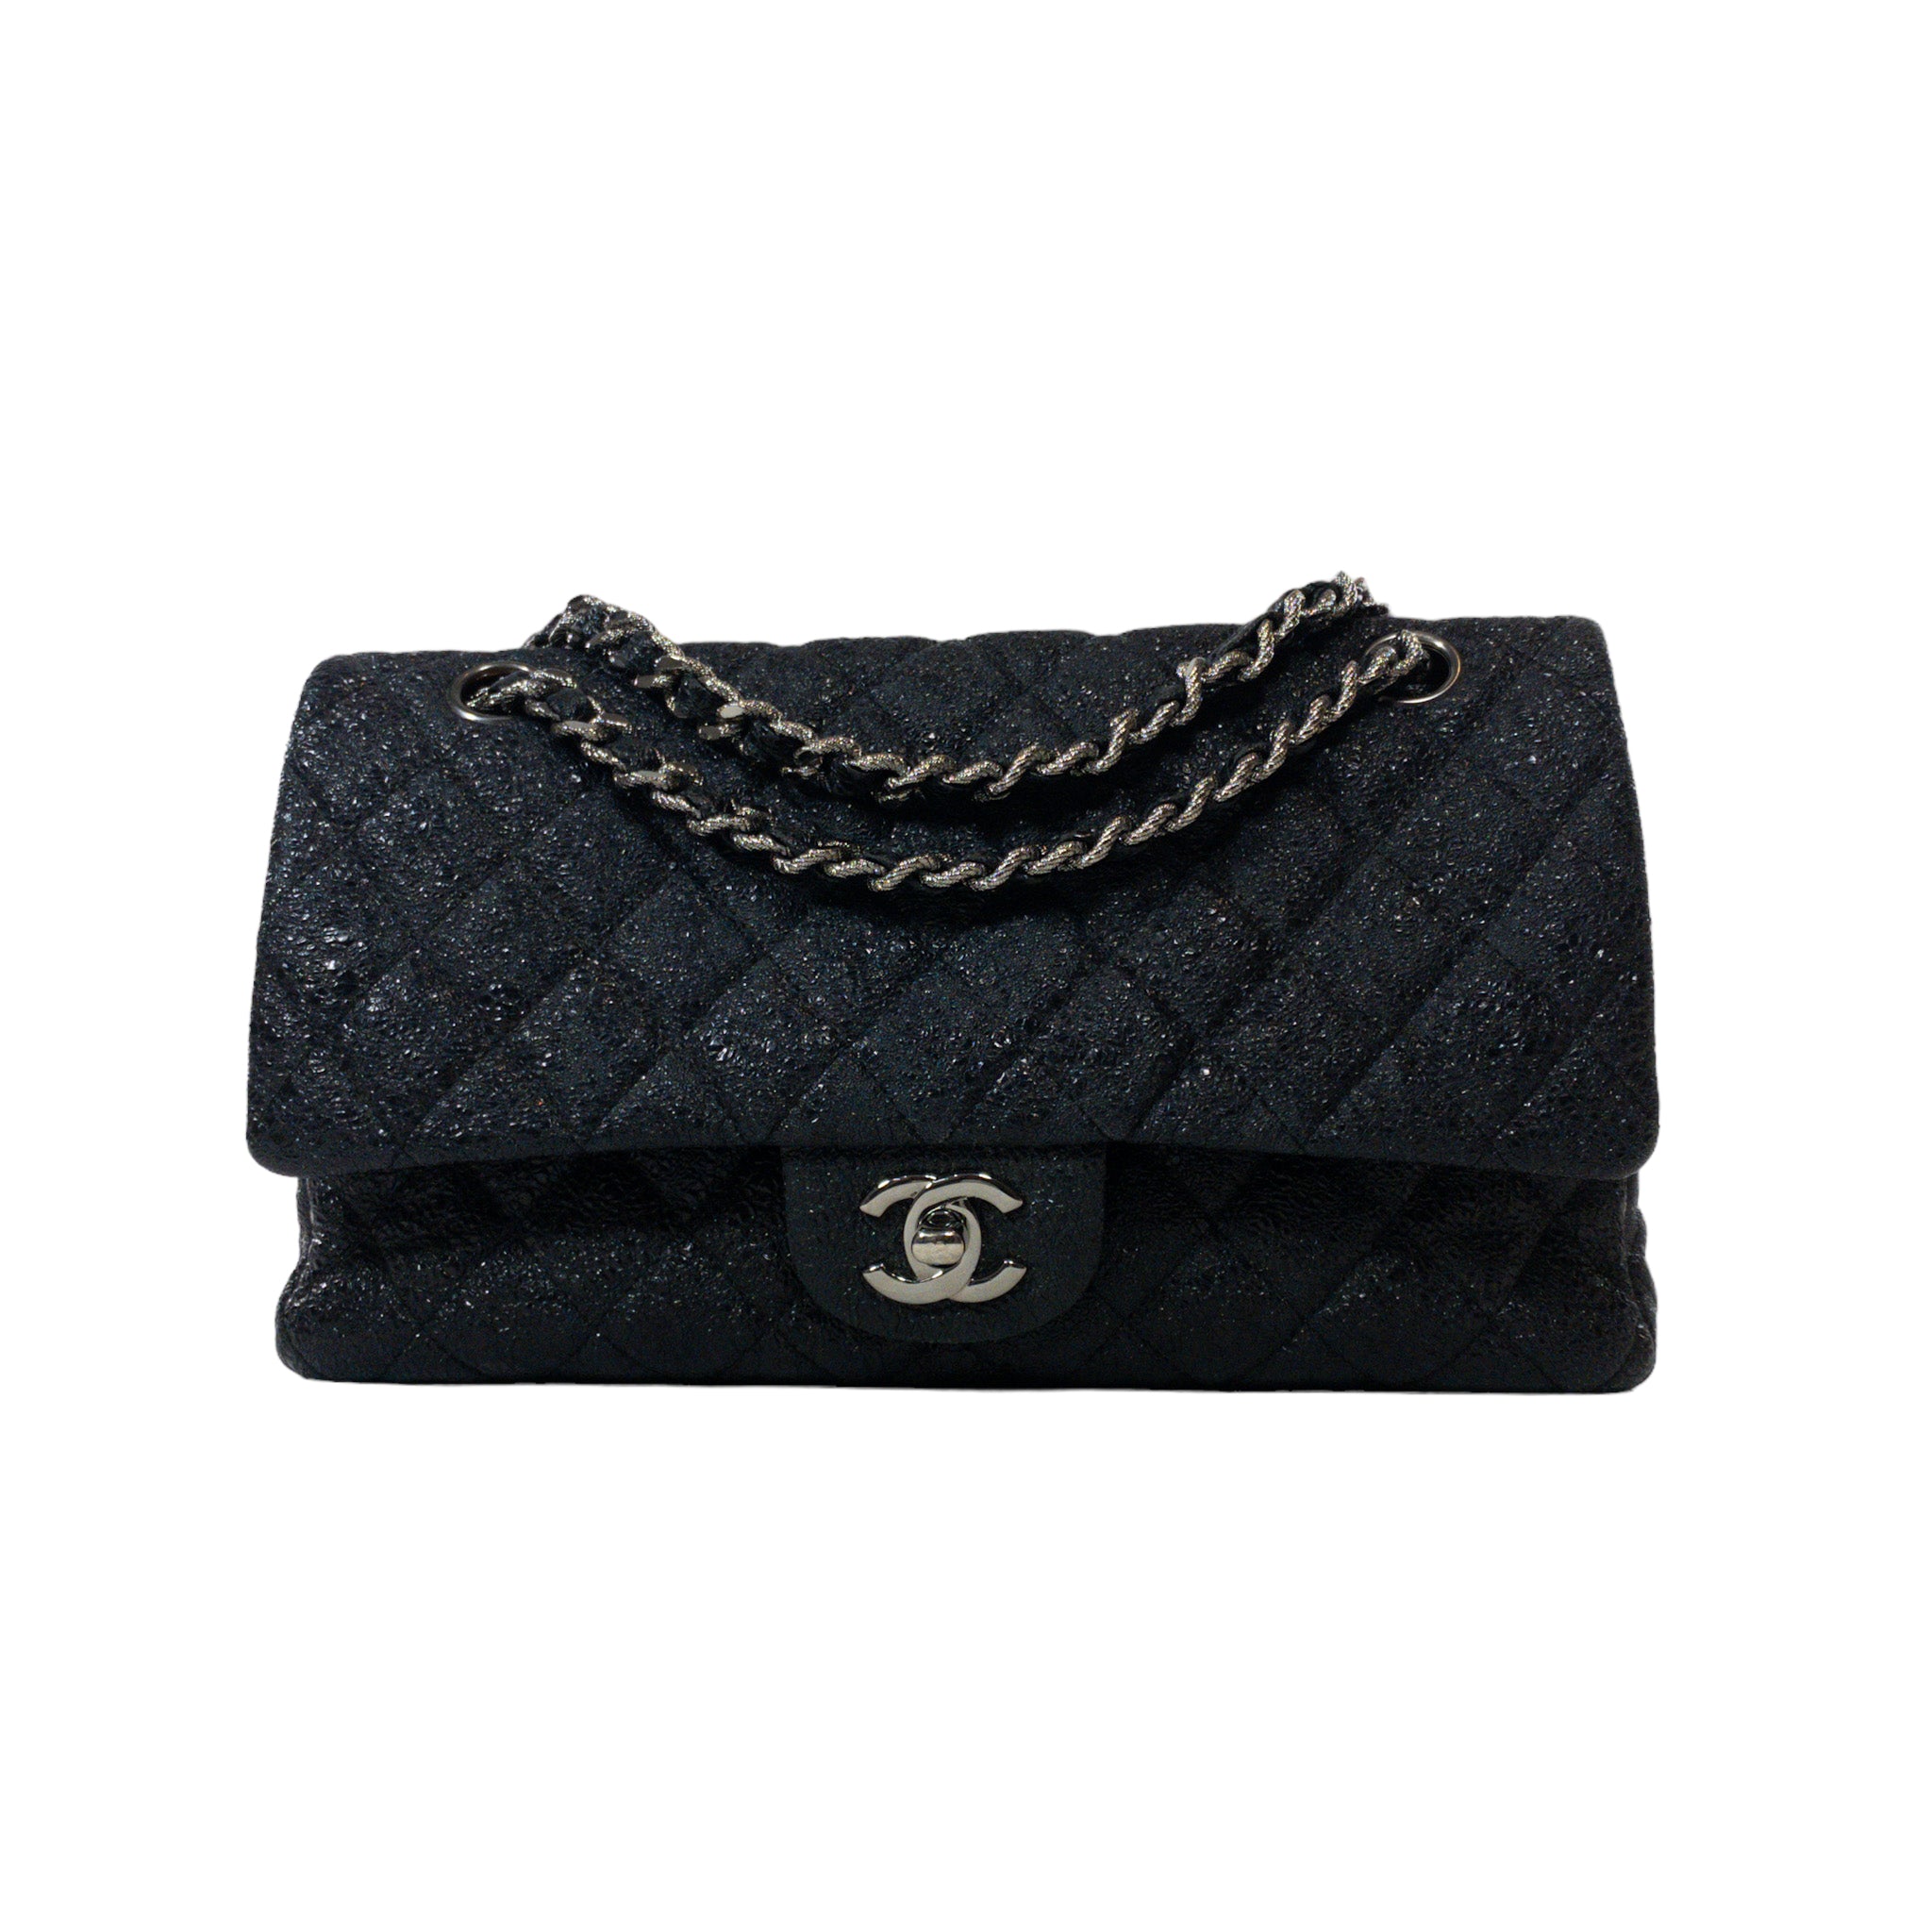 Chanel Has A New Flap Bag That Reminds You Of A Vintage Satchel